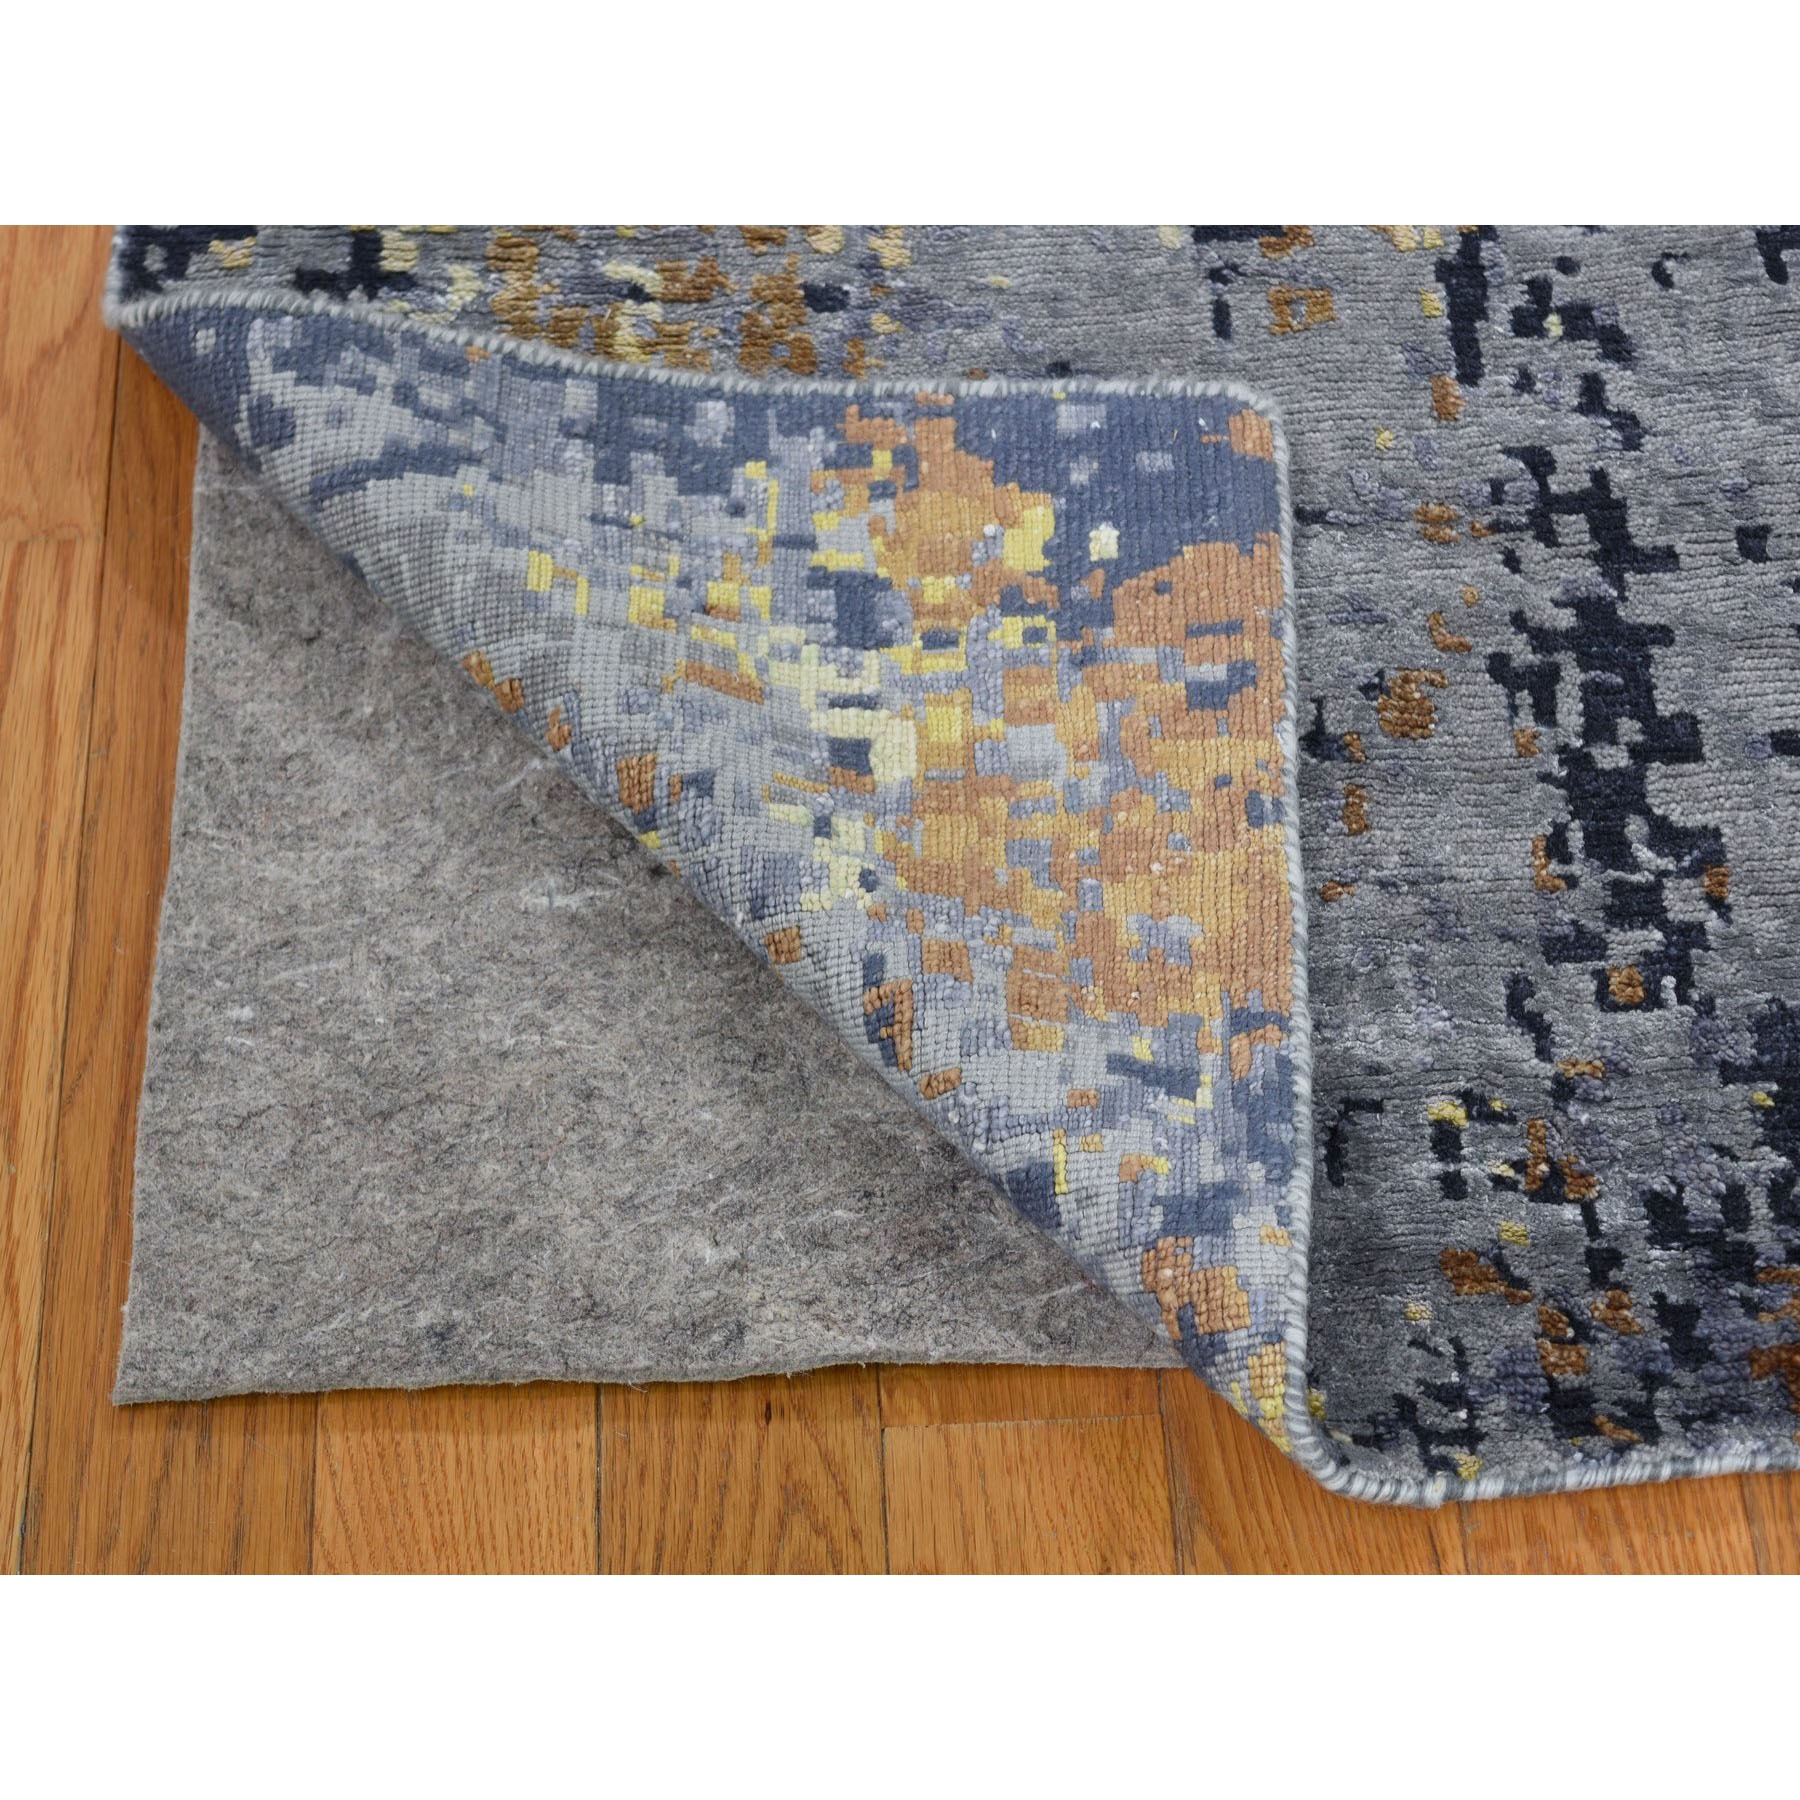 6'x9' Gray Abstract Design Wool and Silk Hi-Low Pile Hand Woven Oriental Rug 